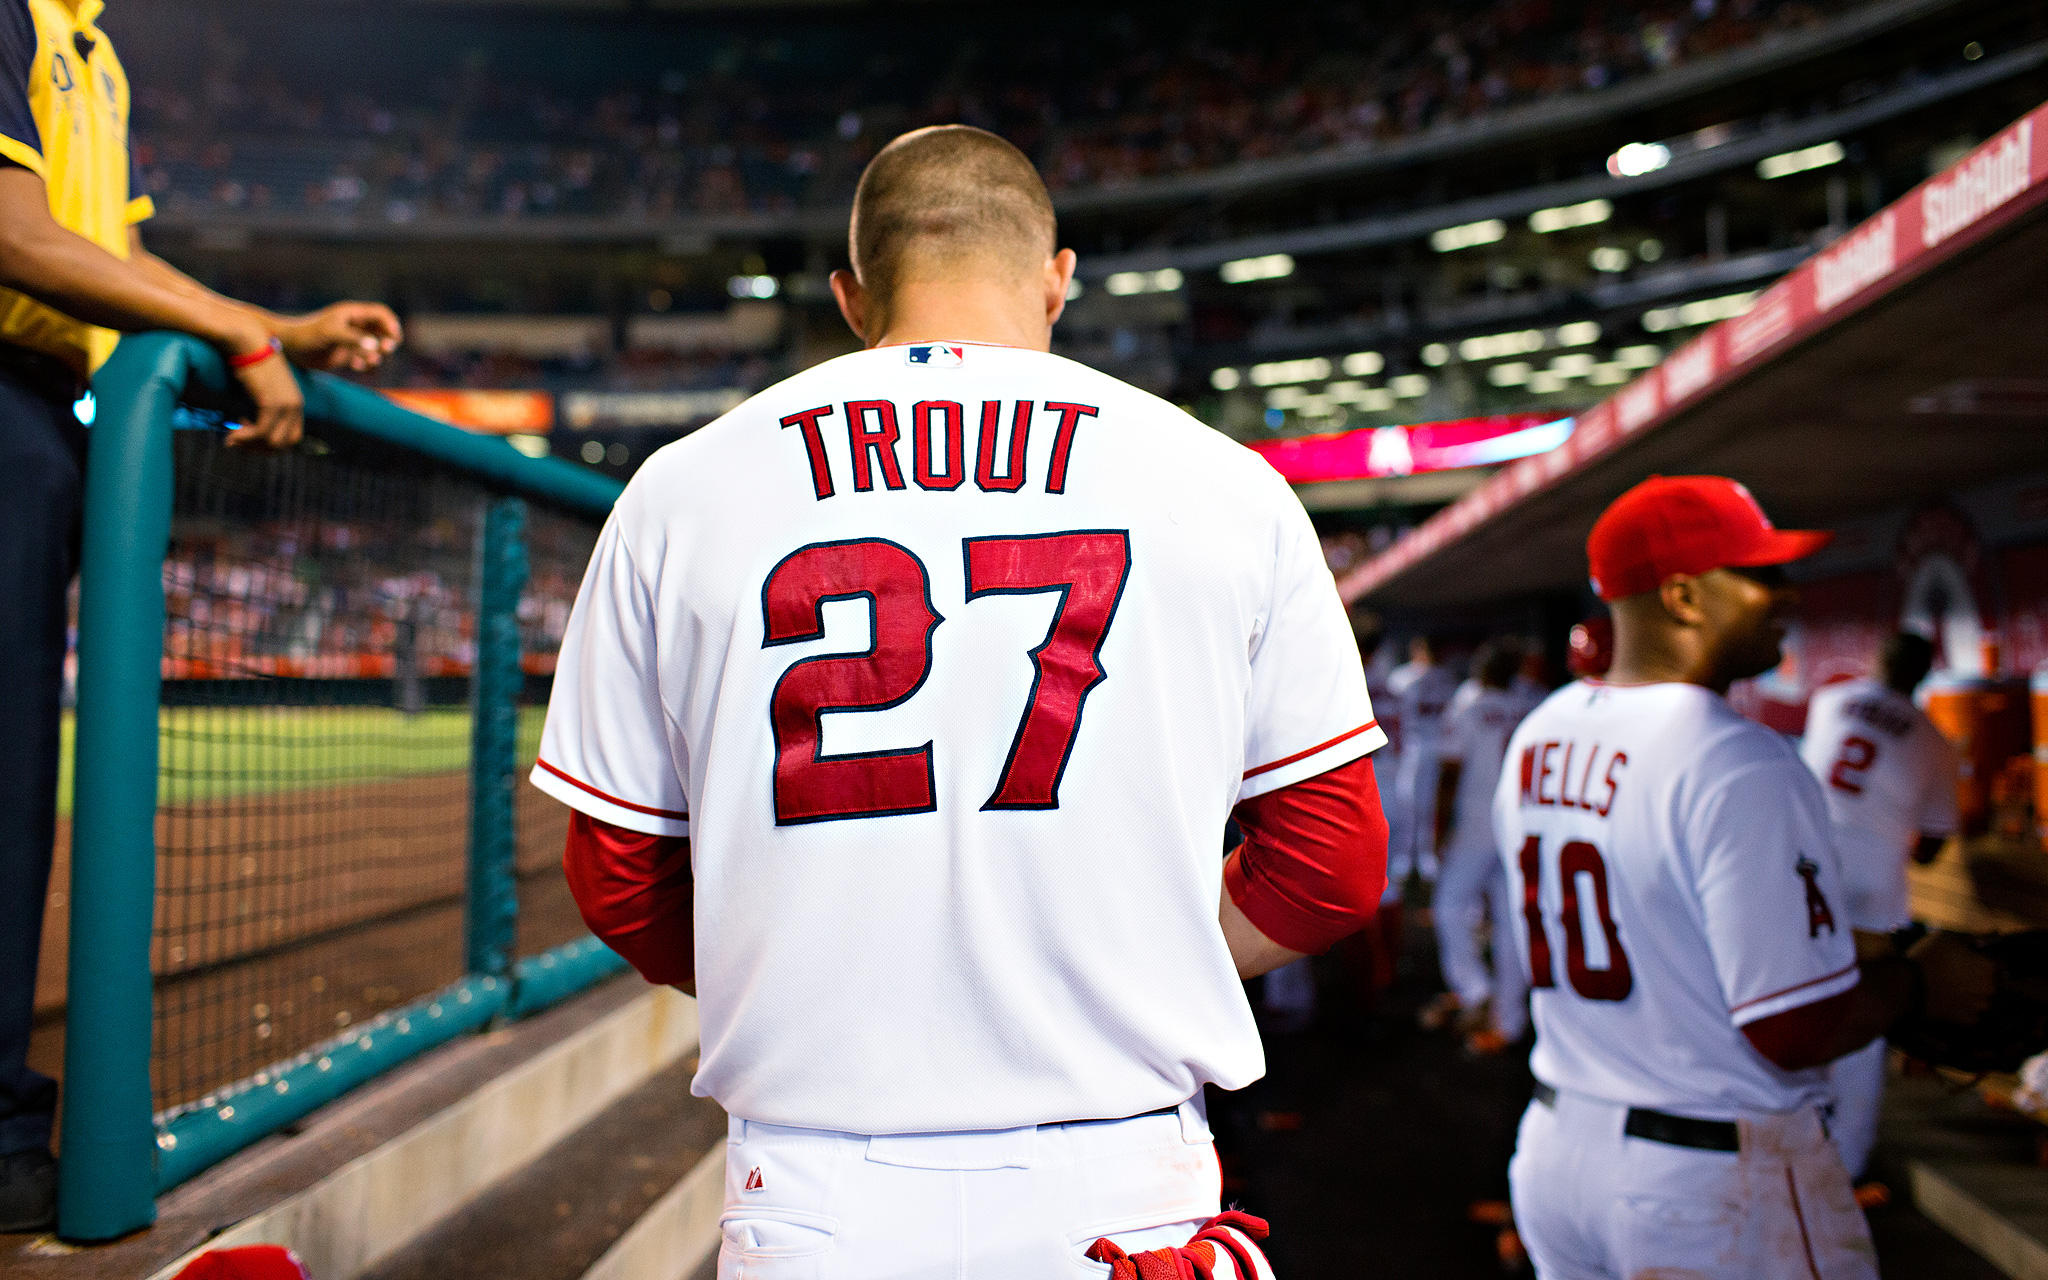 Mike Trout Age